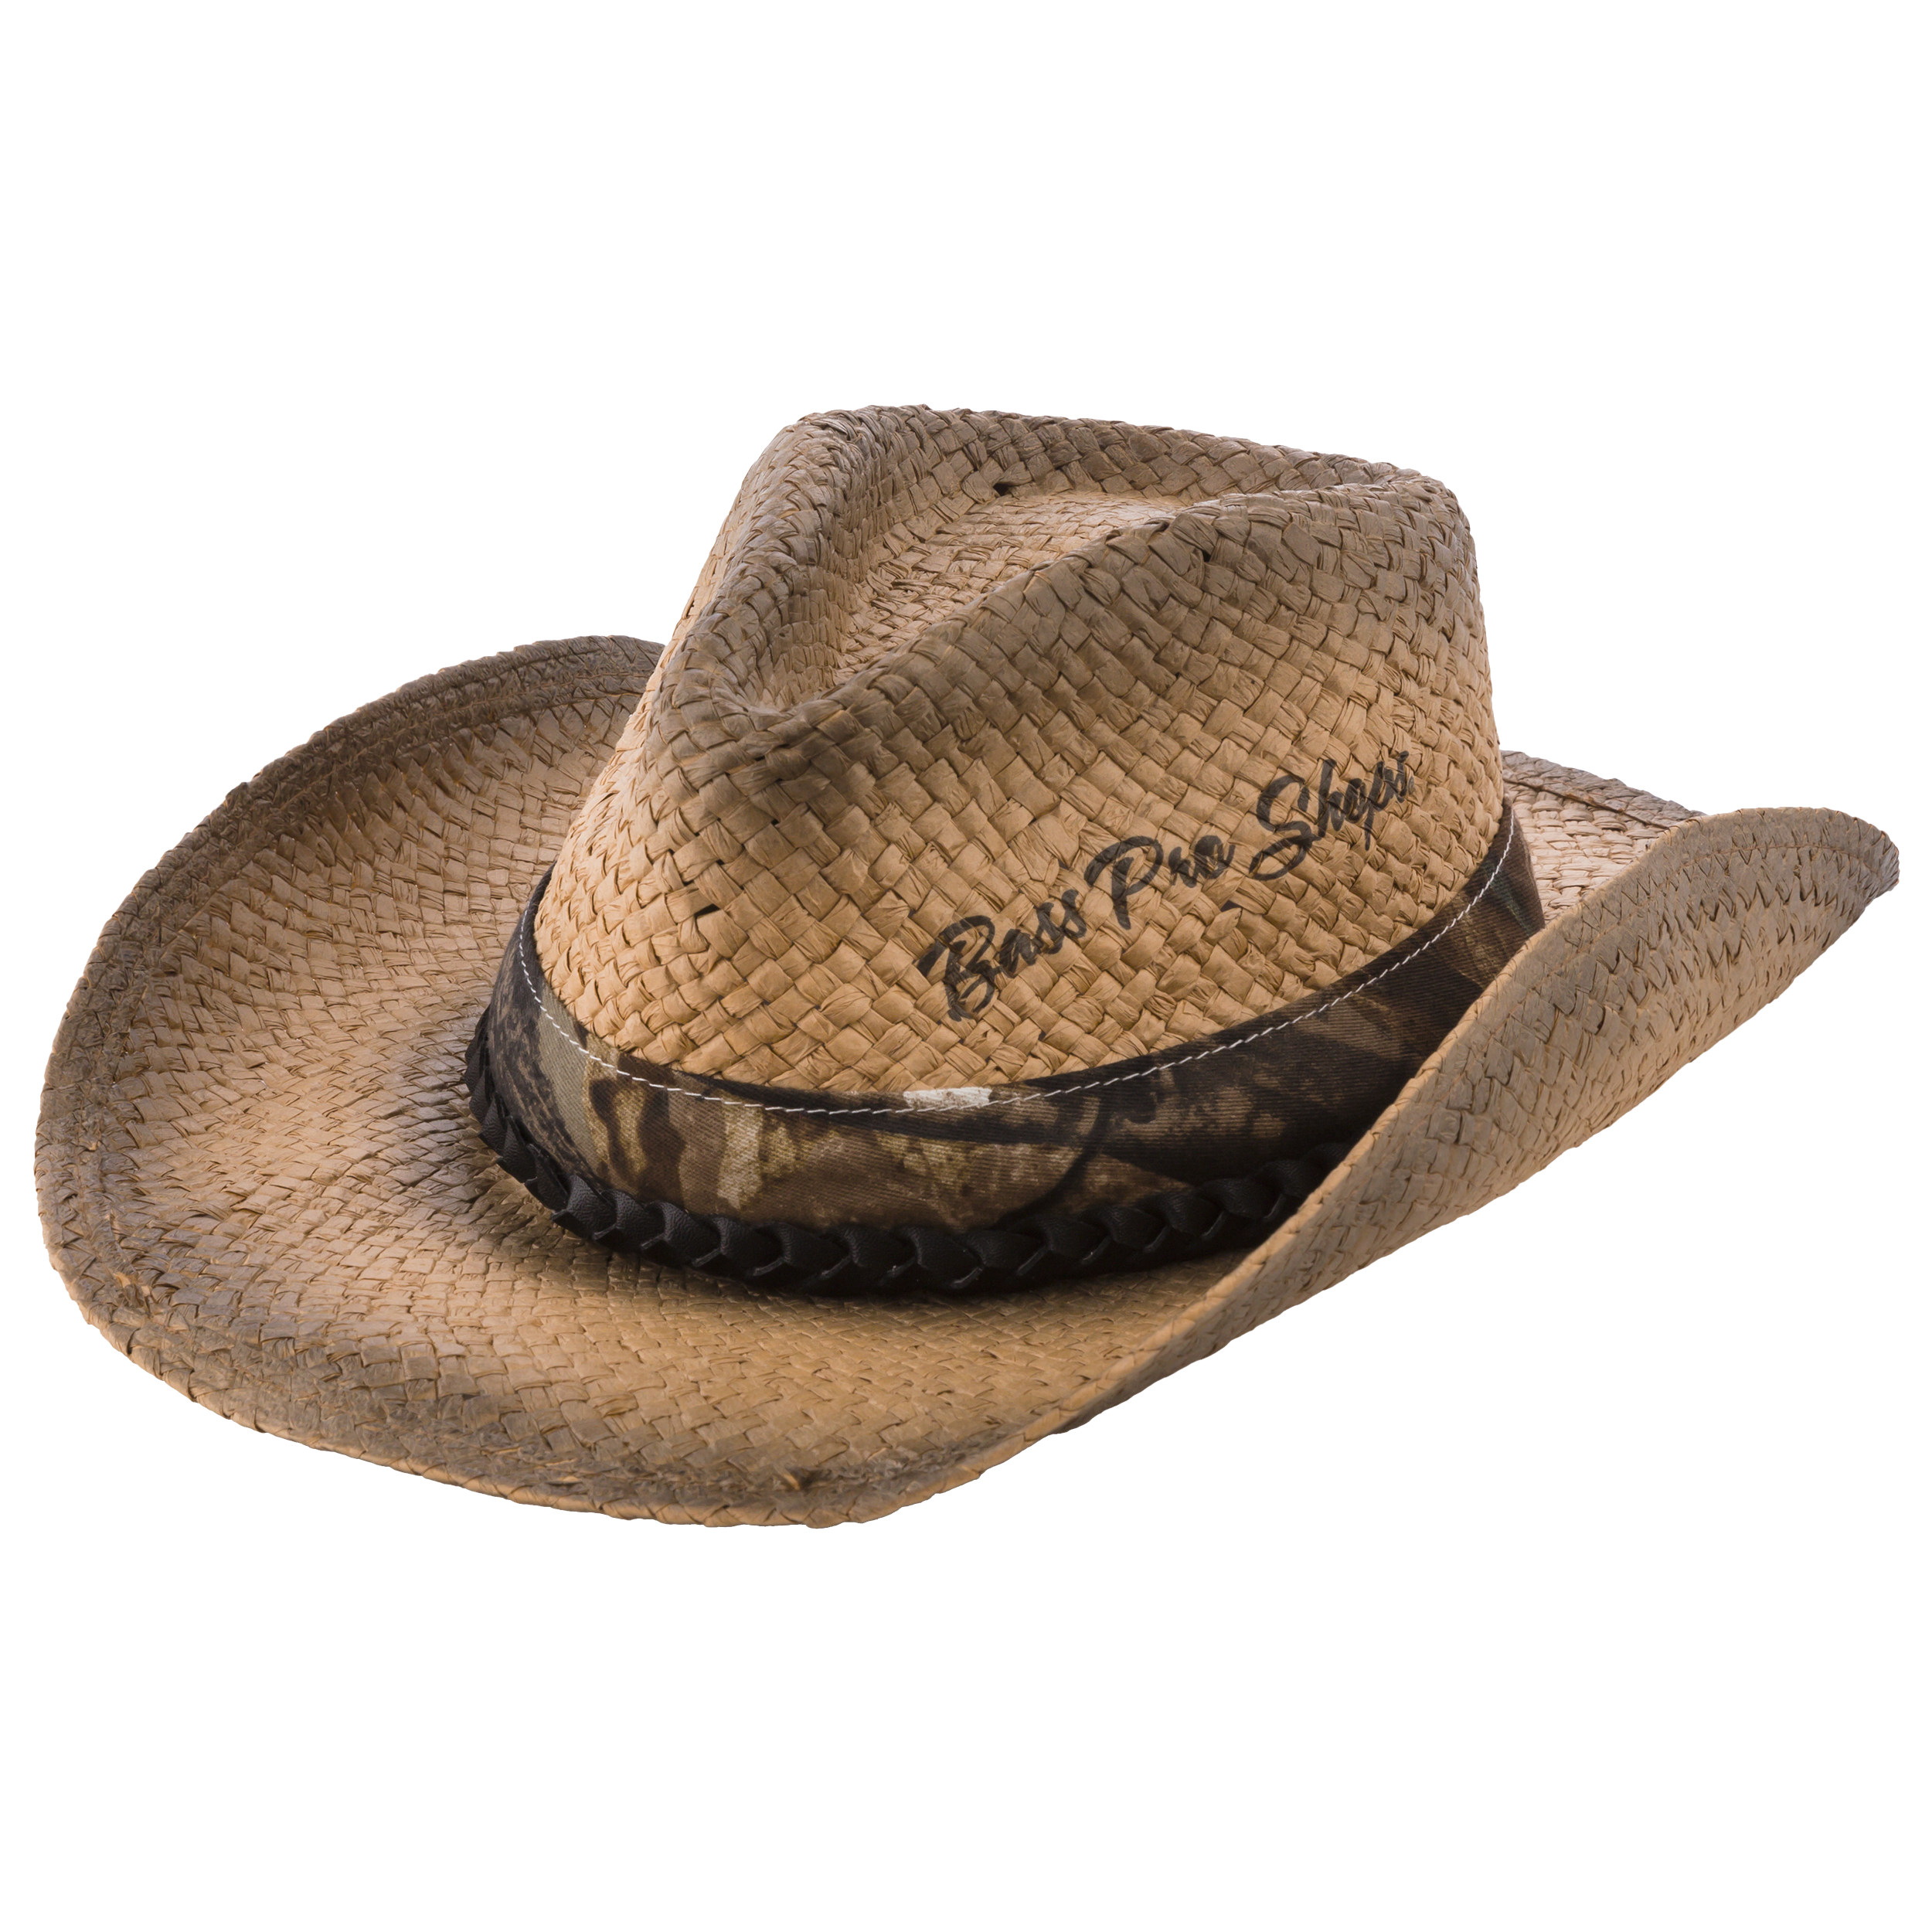 Bass Pro Shops Straw Hat with Camo Braid Band for Men